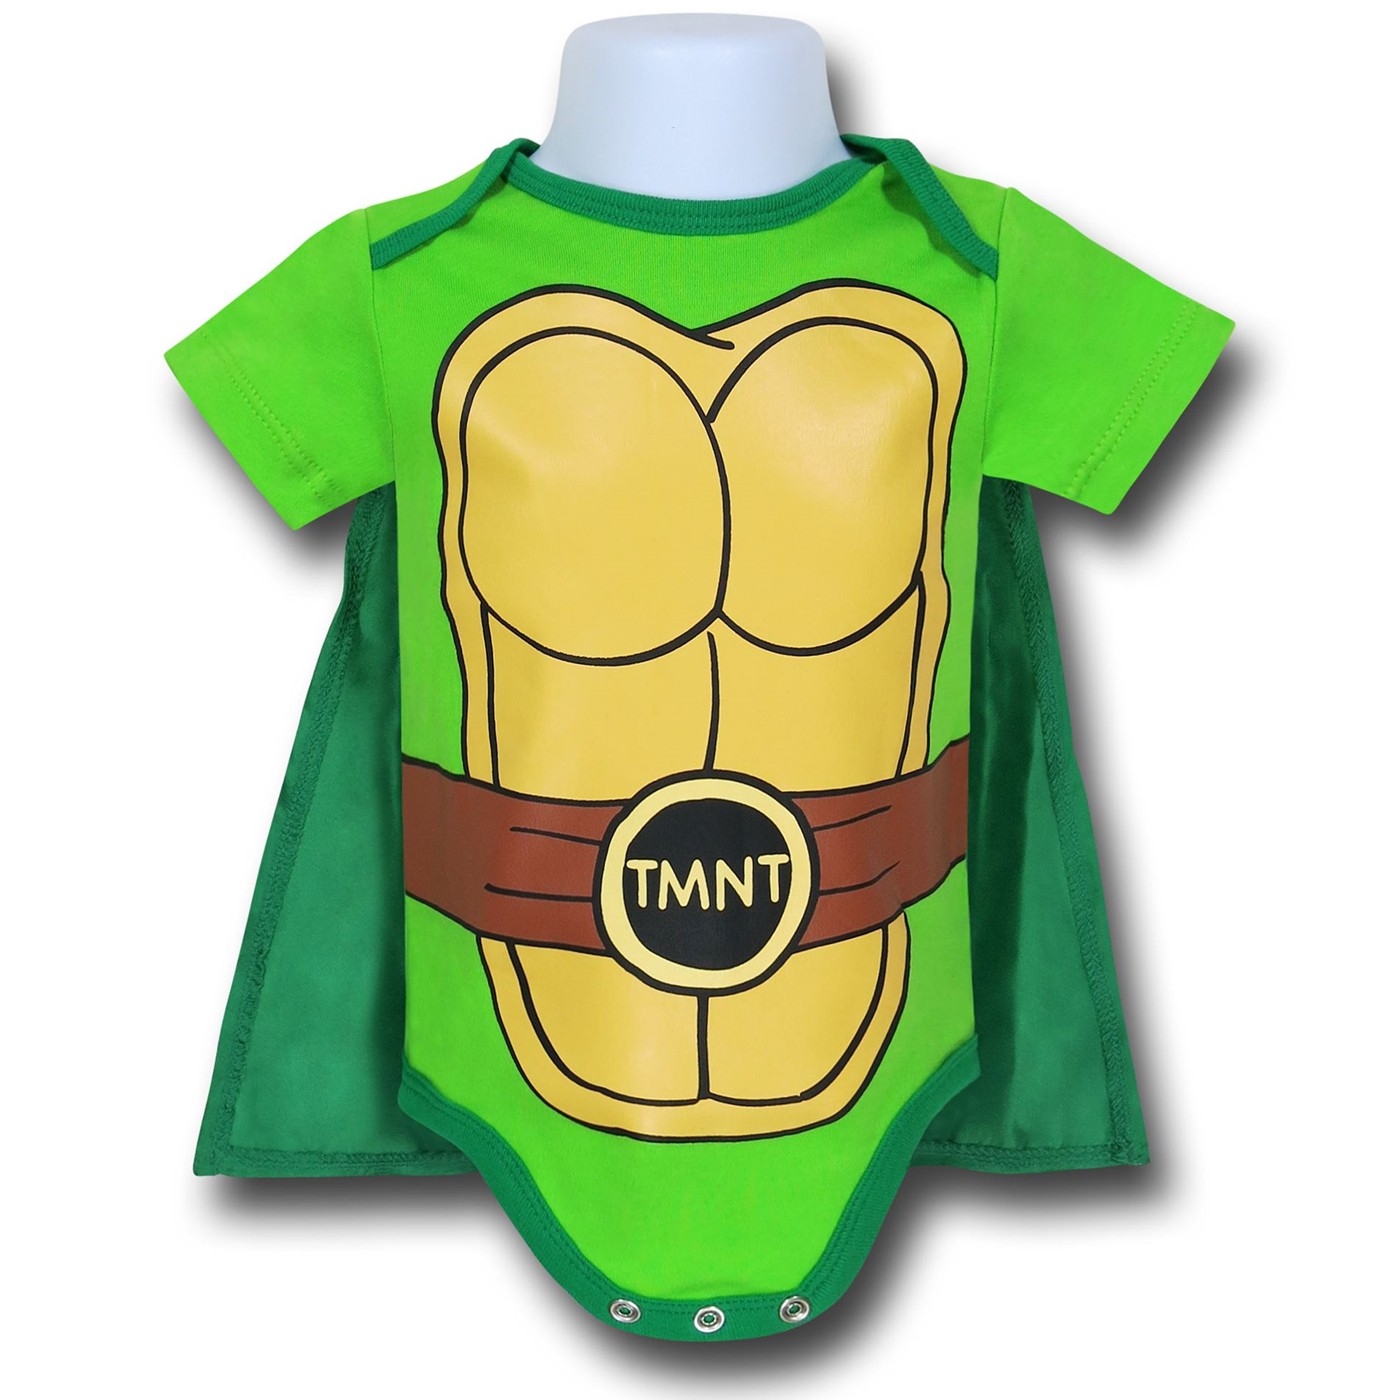 TMNT Caped Costume Infant Snapsuit